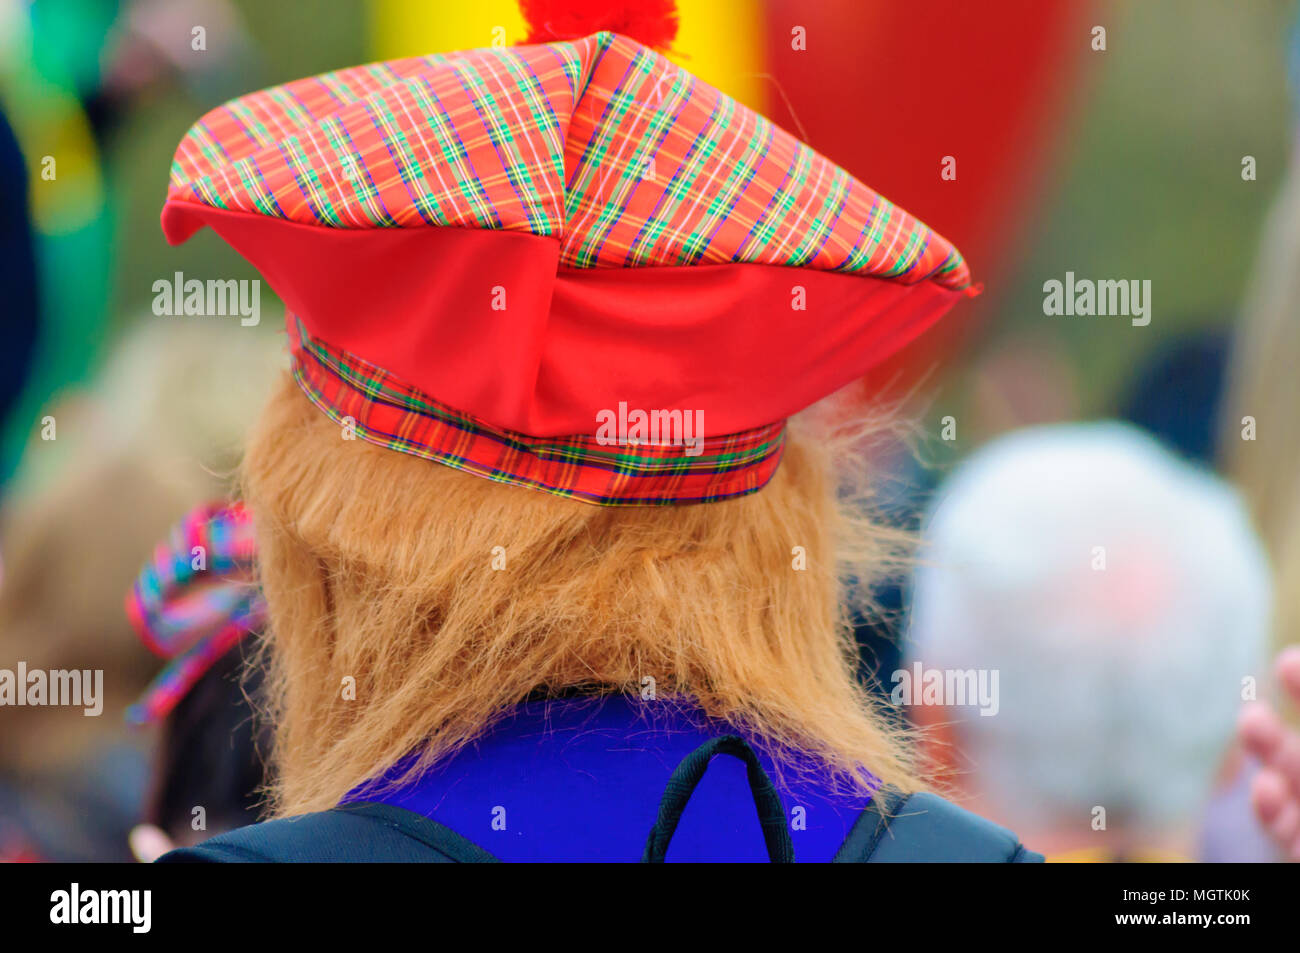 Glasgow, Scotland, UK. 29th April, 2018. The back of a walkers head wearing a tartan hat and ginger hair, see you jimmy hat, at the start of the Kiltwalk Glasgow 2018, a charity event where walkers have three distances to choose from, a Mighty Stride (23 miles), a Big Stroll (14 miles) or the Wee Wander (6 miles). This year involved 10,000 walkers and raised two million pounds for 600 charities. Credit: Skully/Alamy Live News Stock Photo